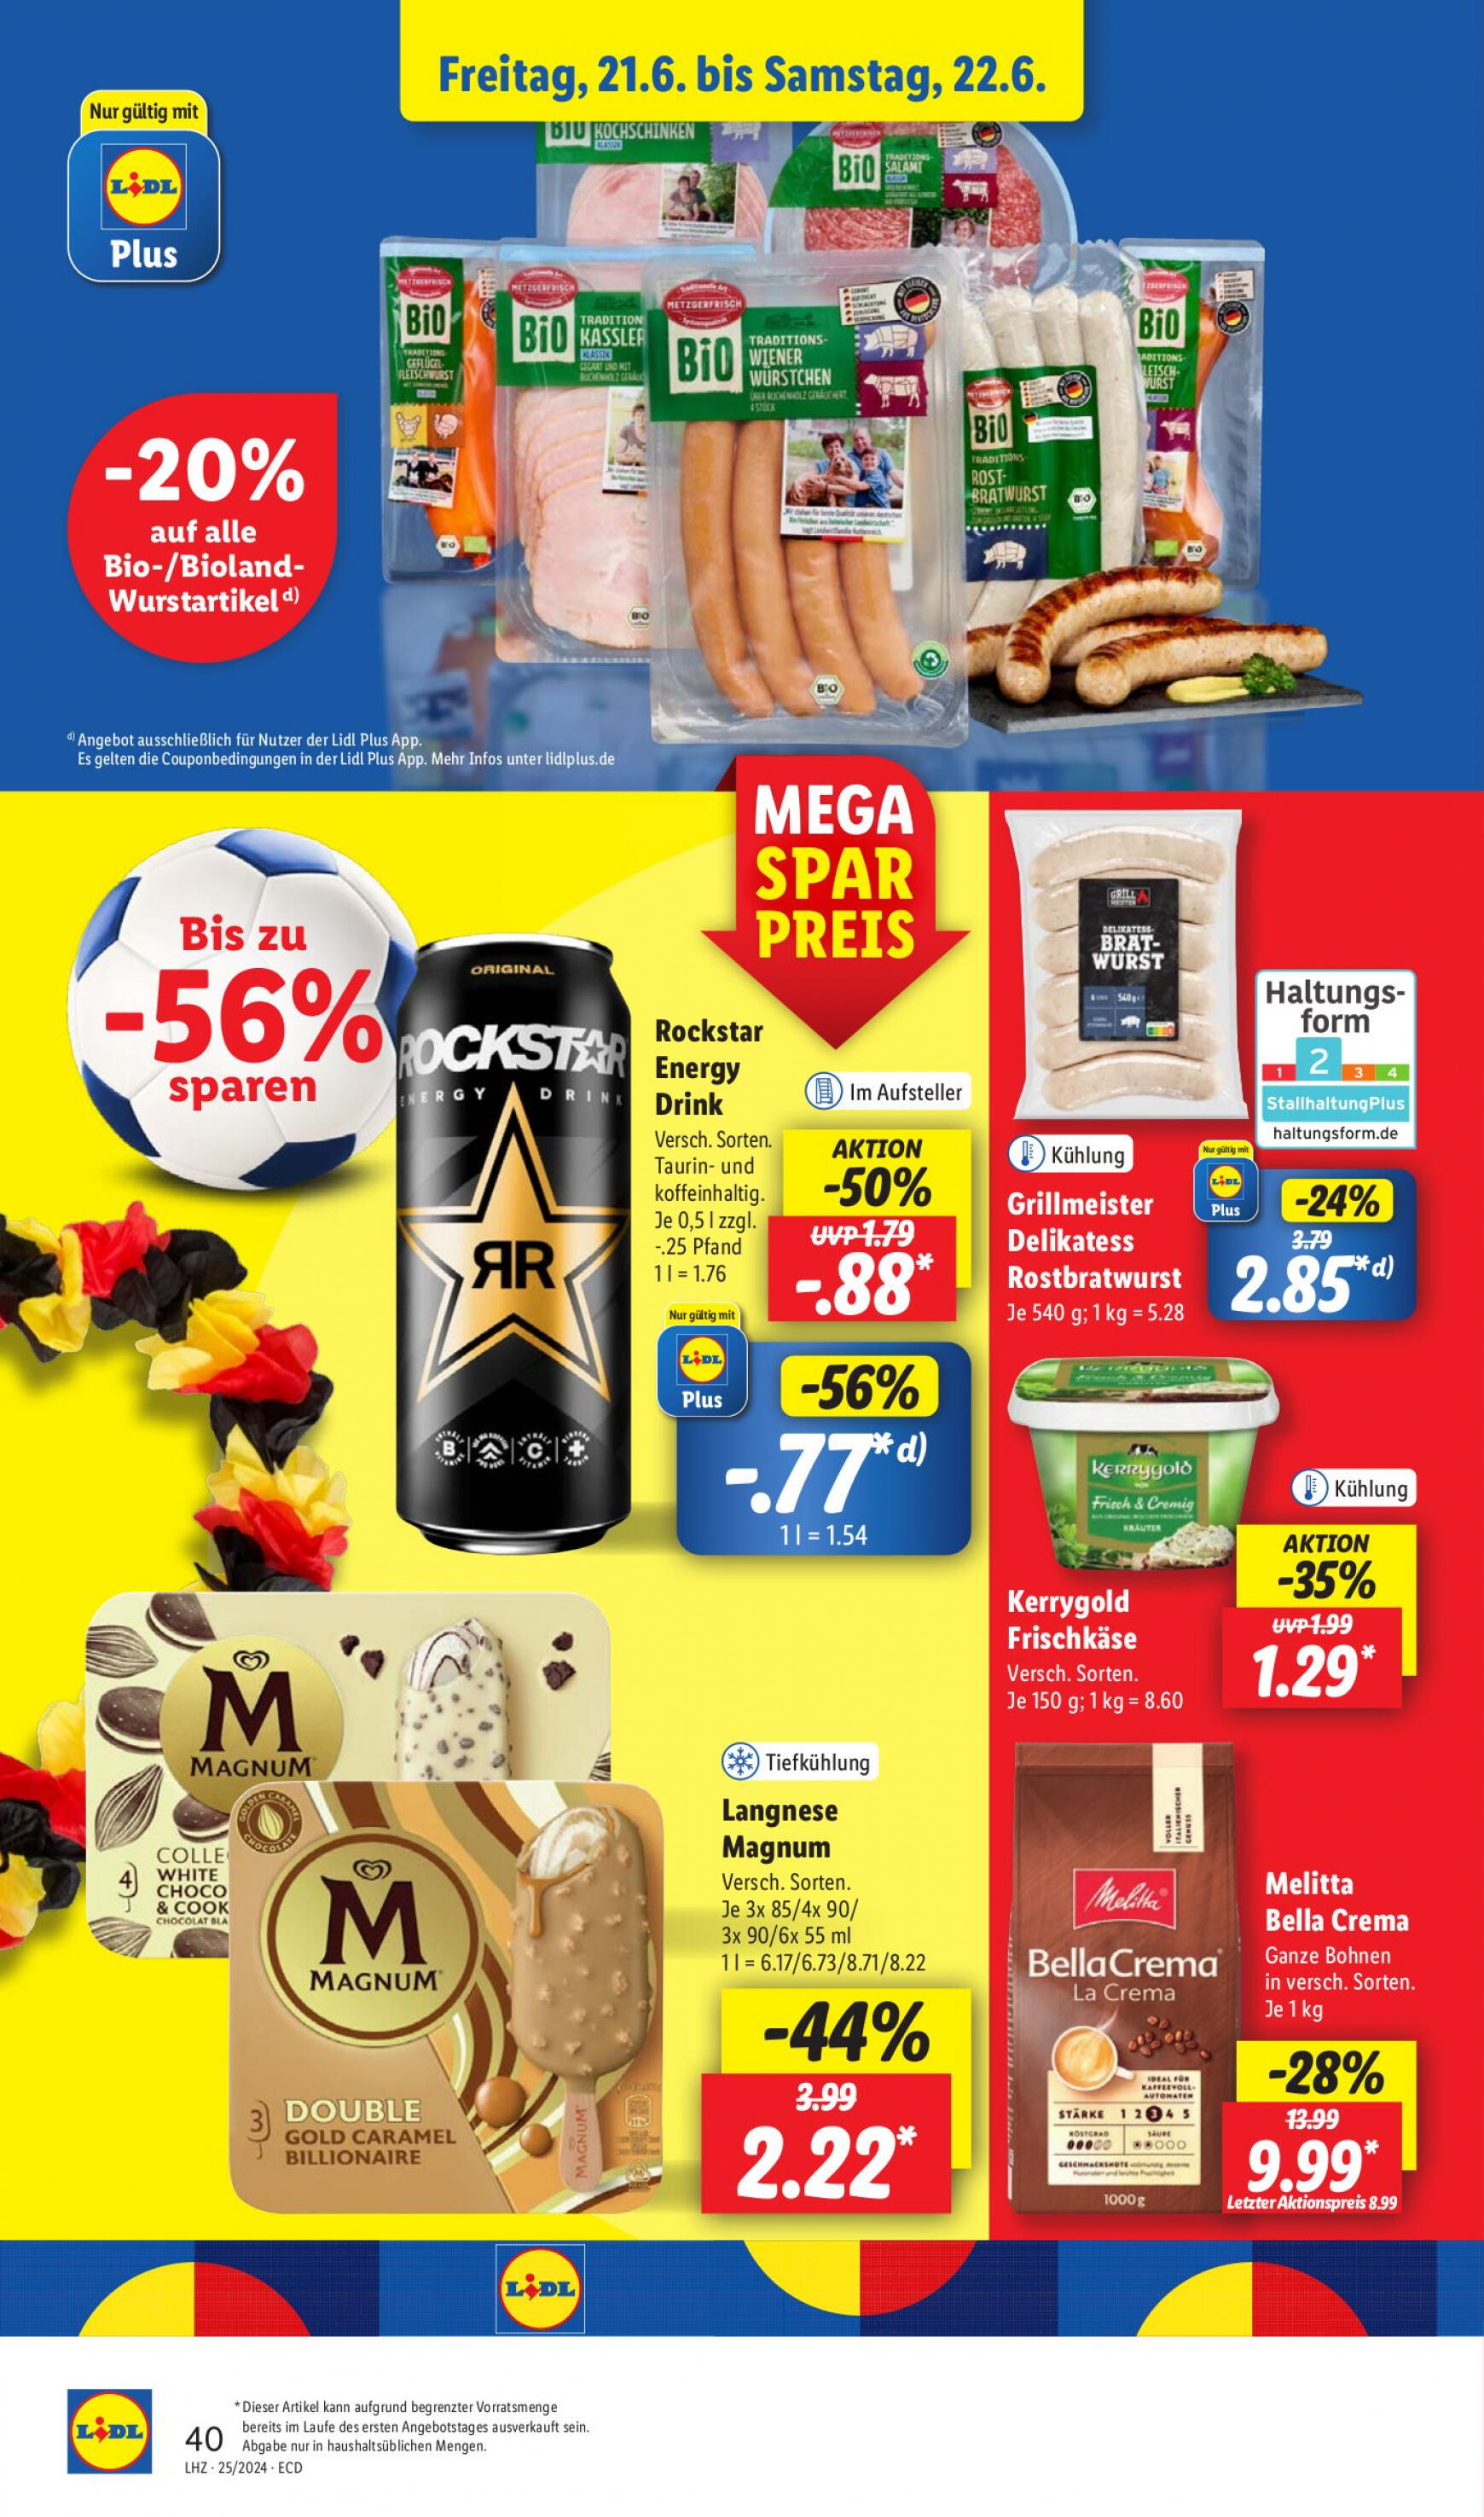 lidl - Flyer Lidl aktuell 17.06. - 22.06. - page: 52